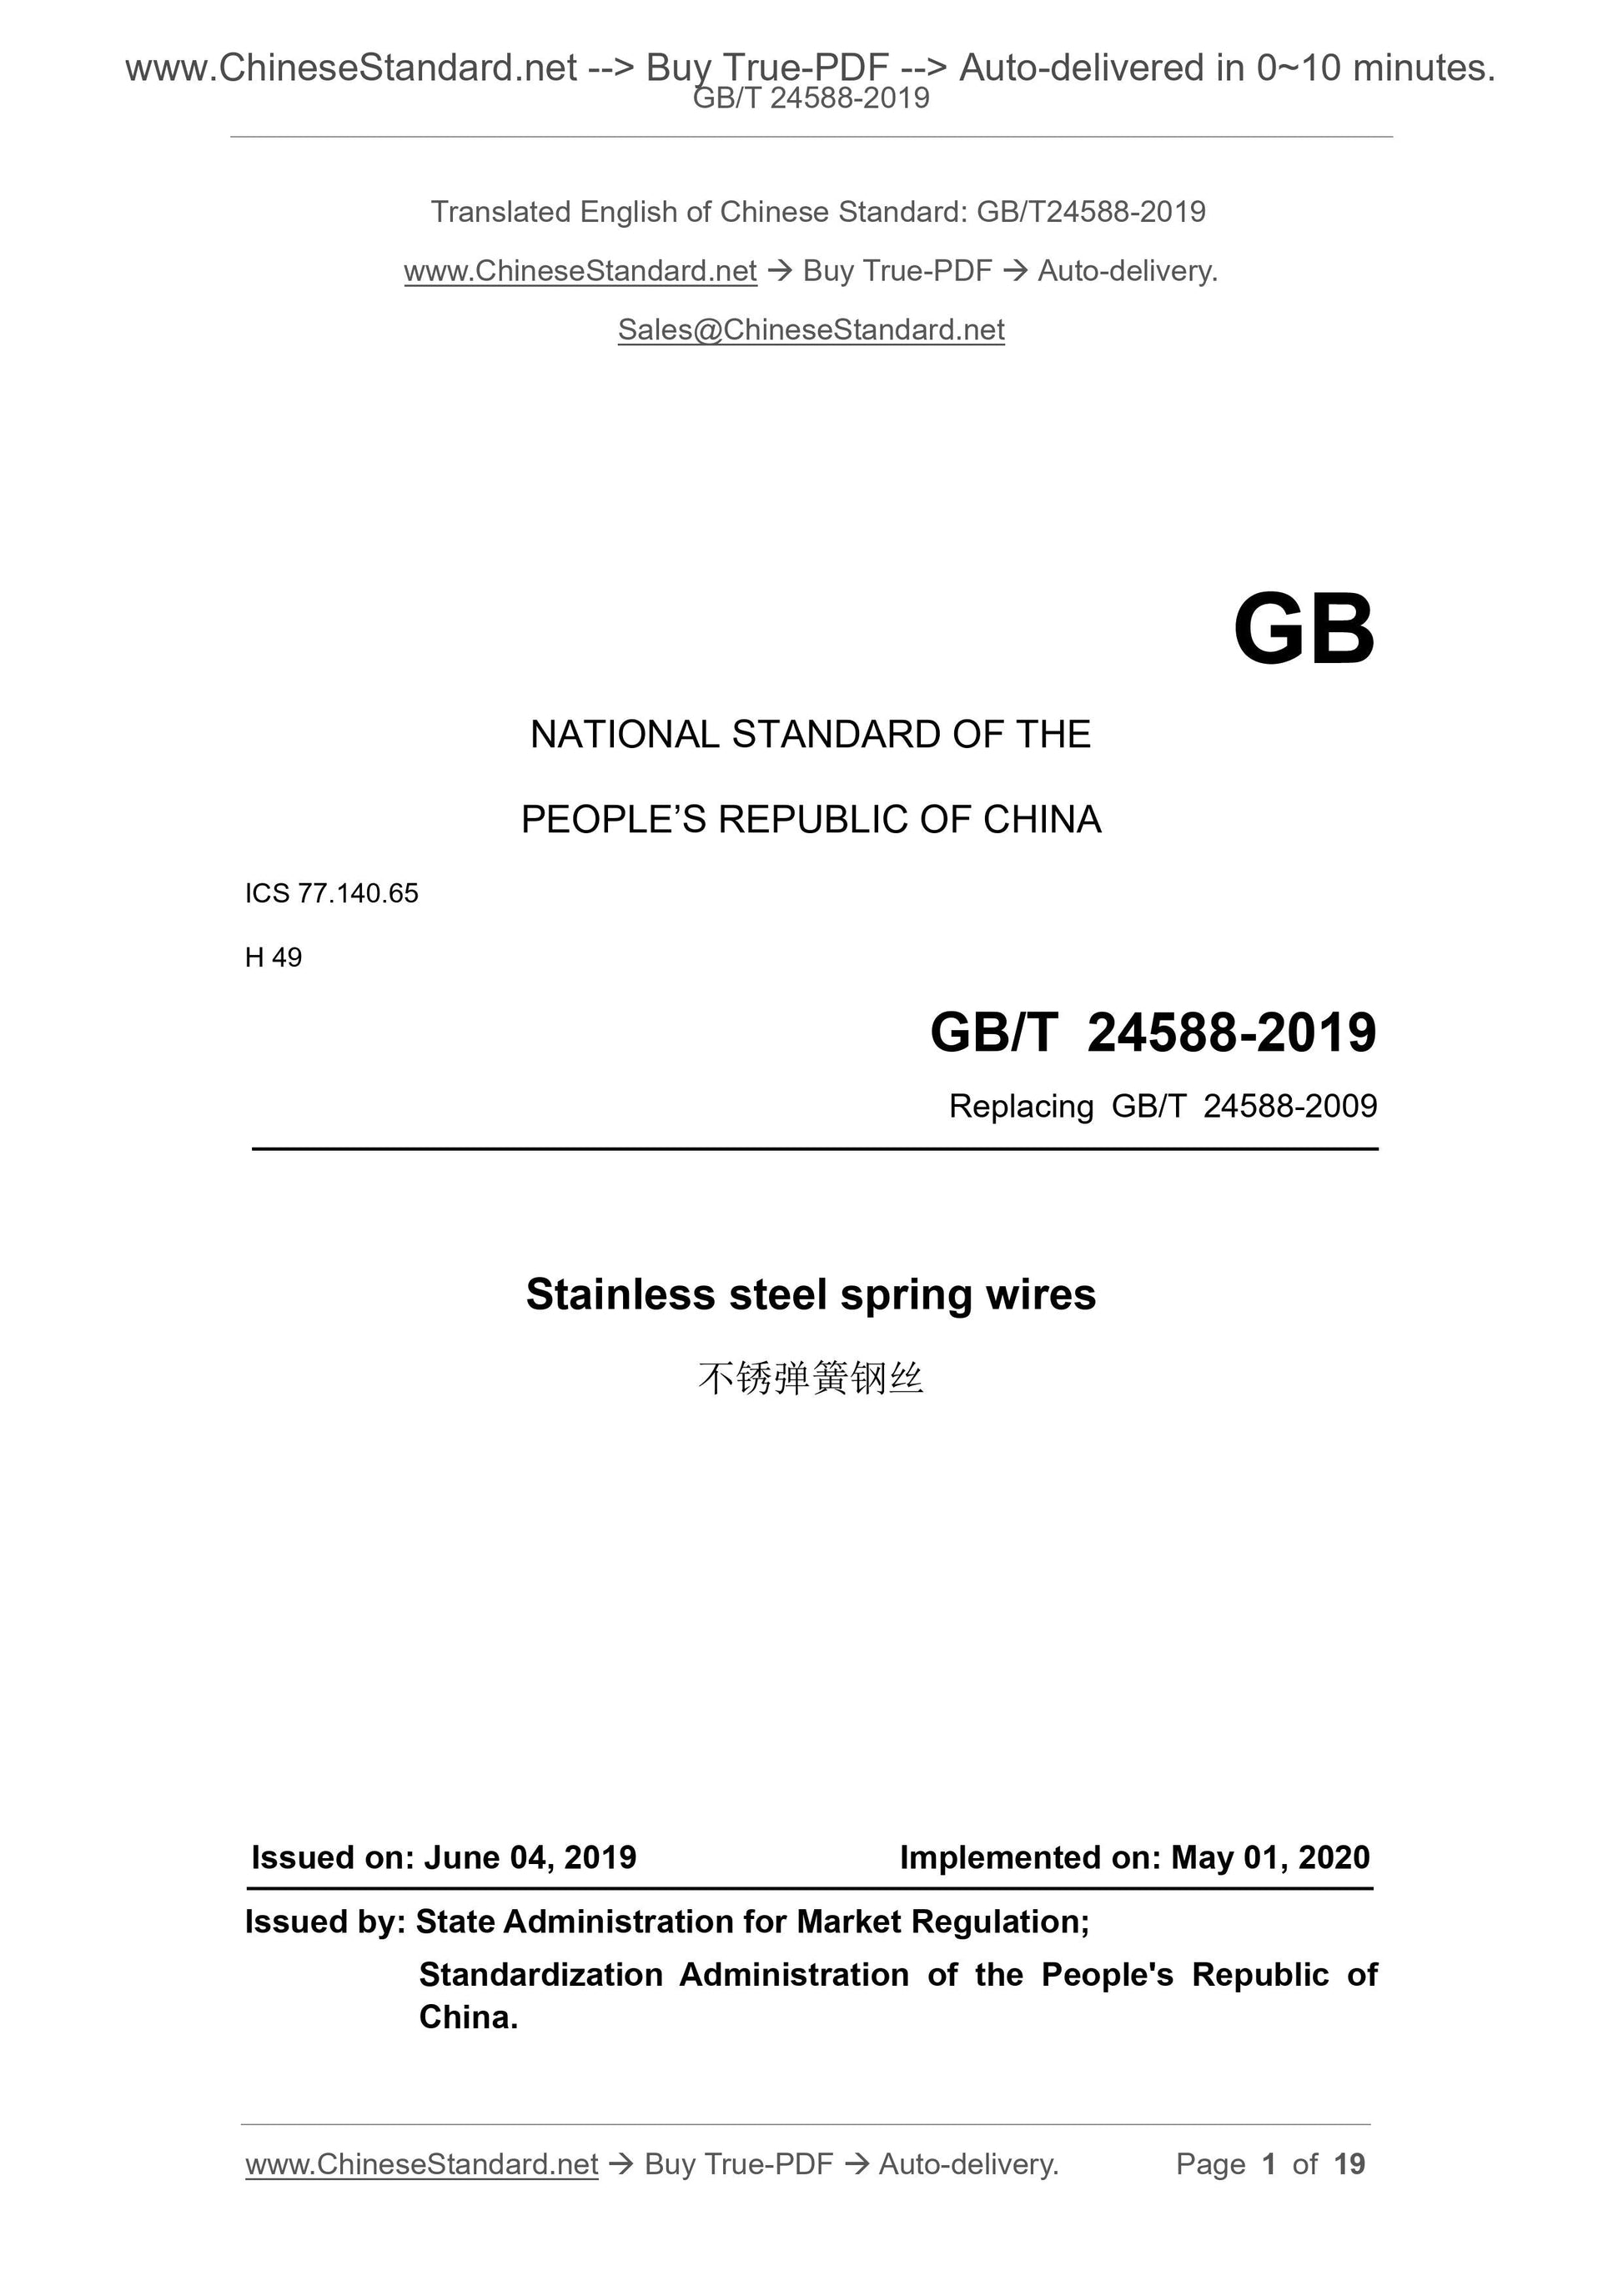 GB/T 24588-2019 Page 1